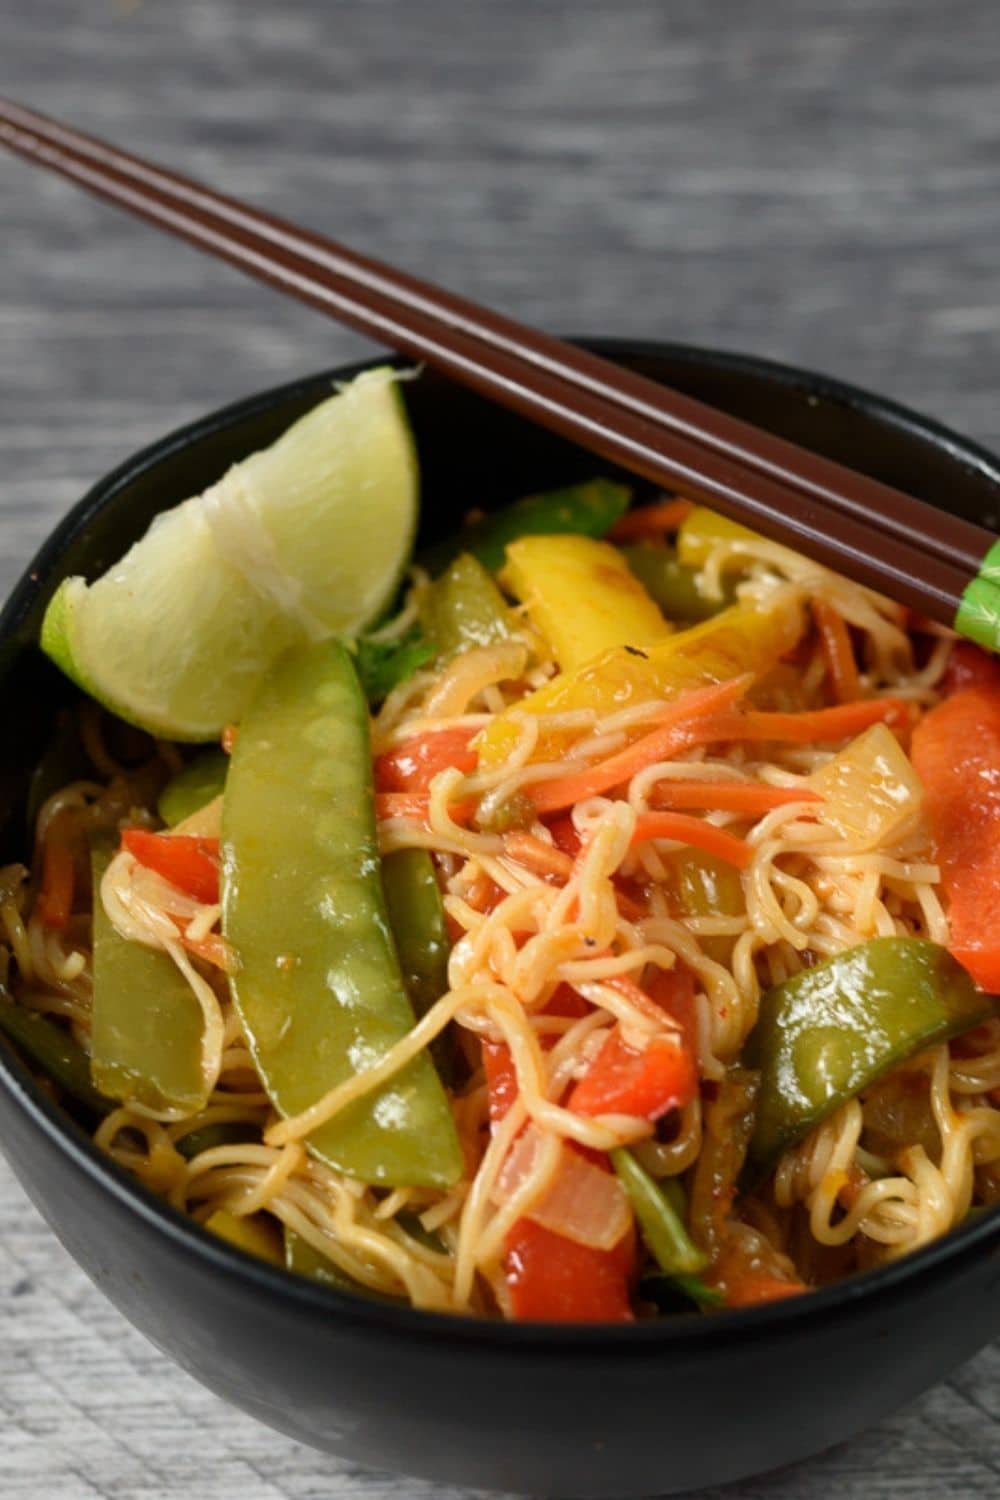 Thai Noodles in Red Curry Sauce